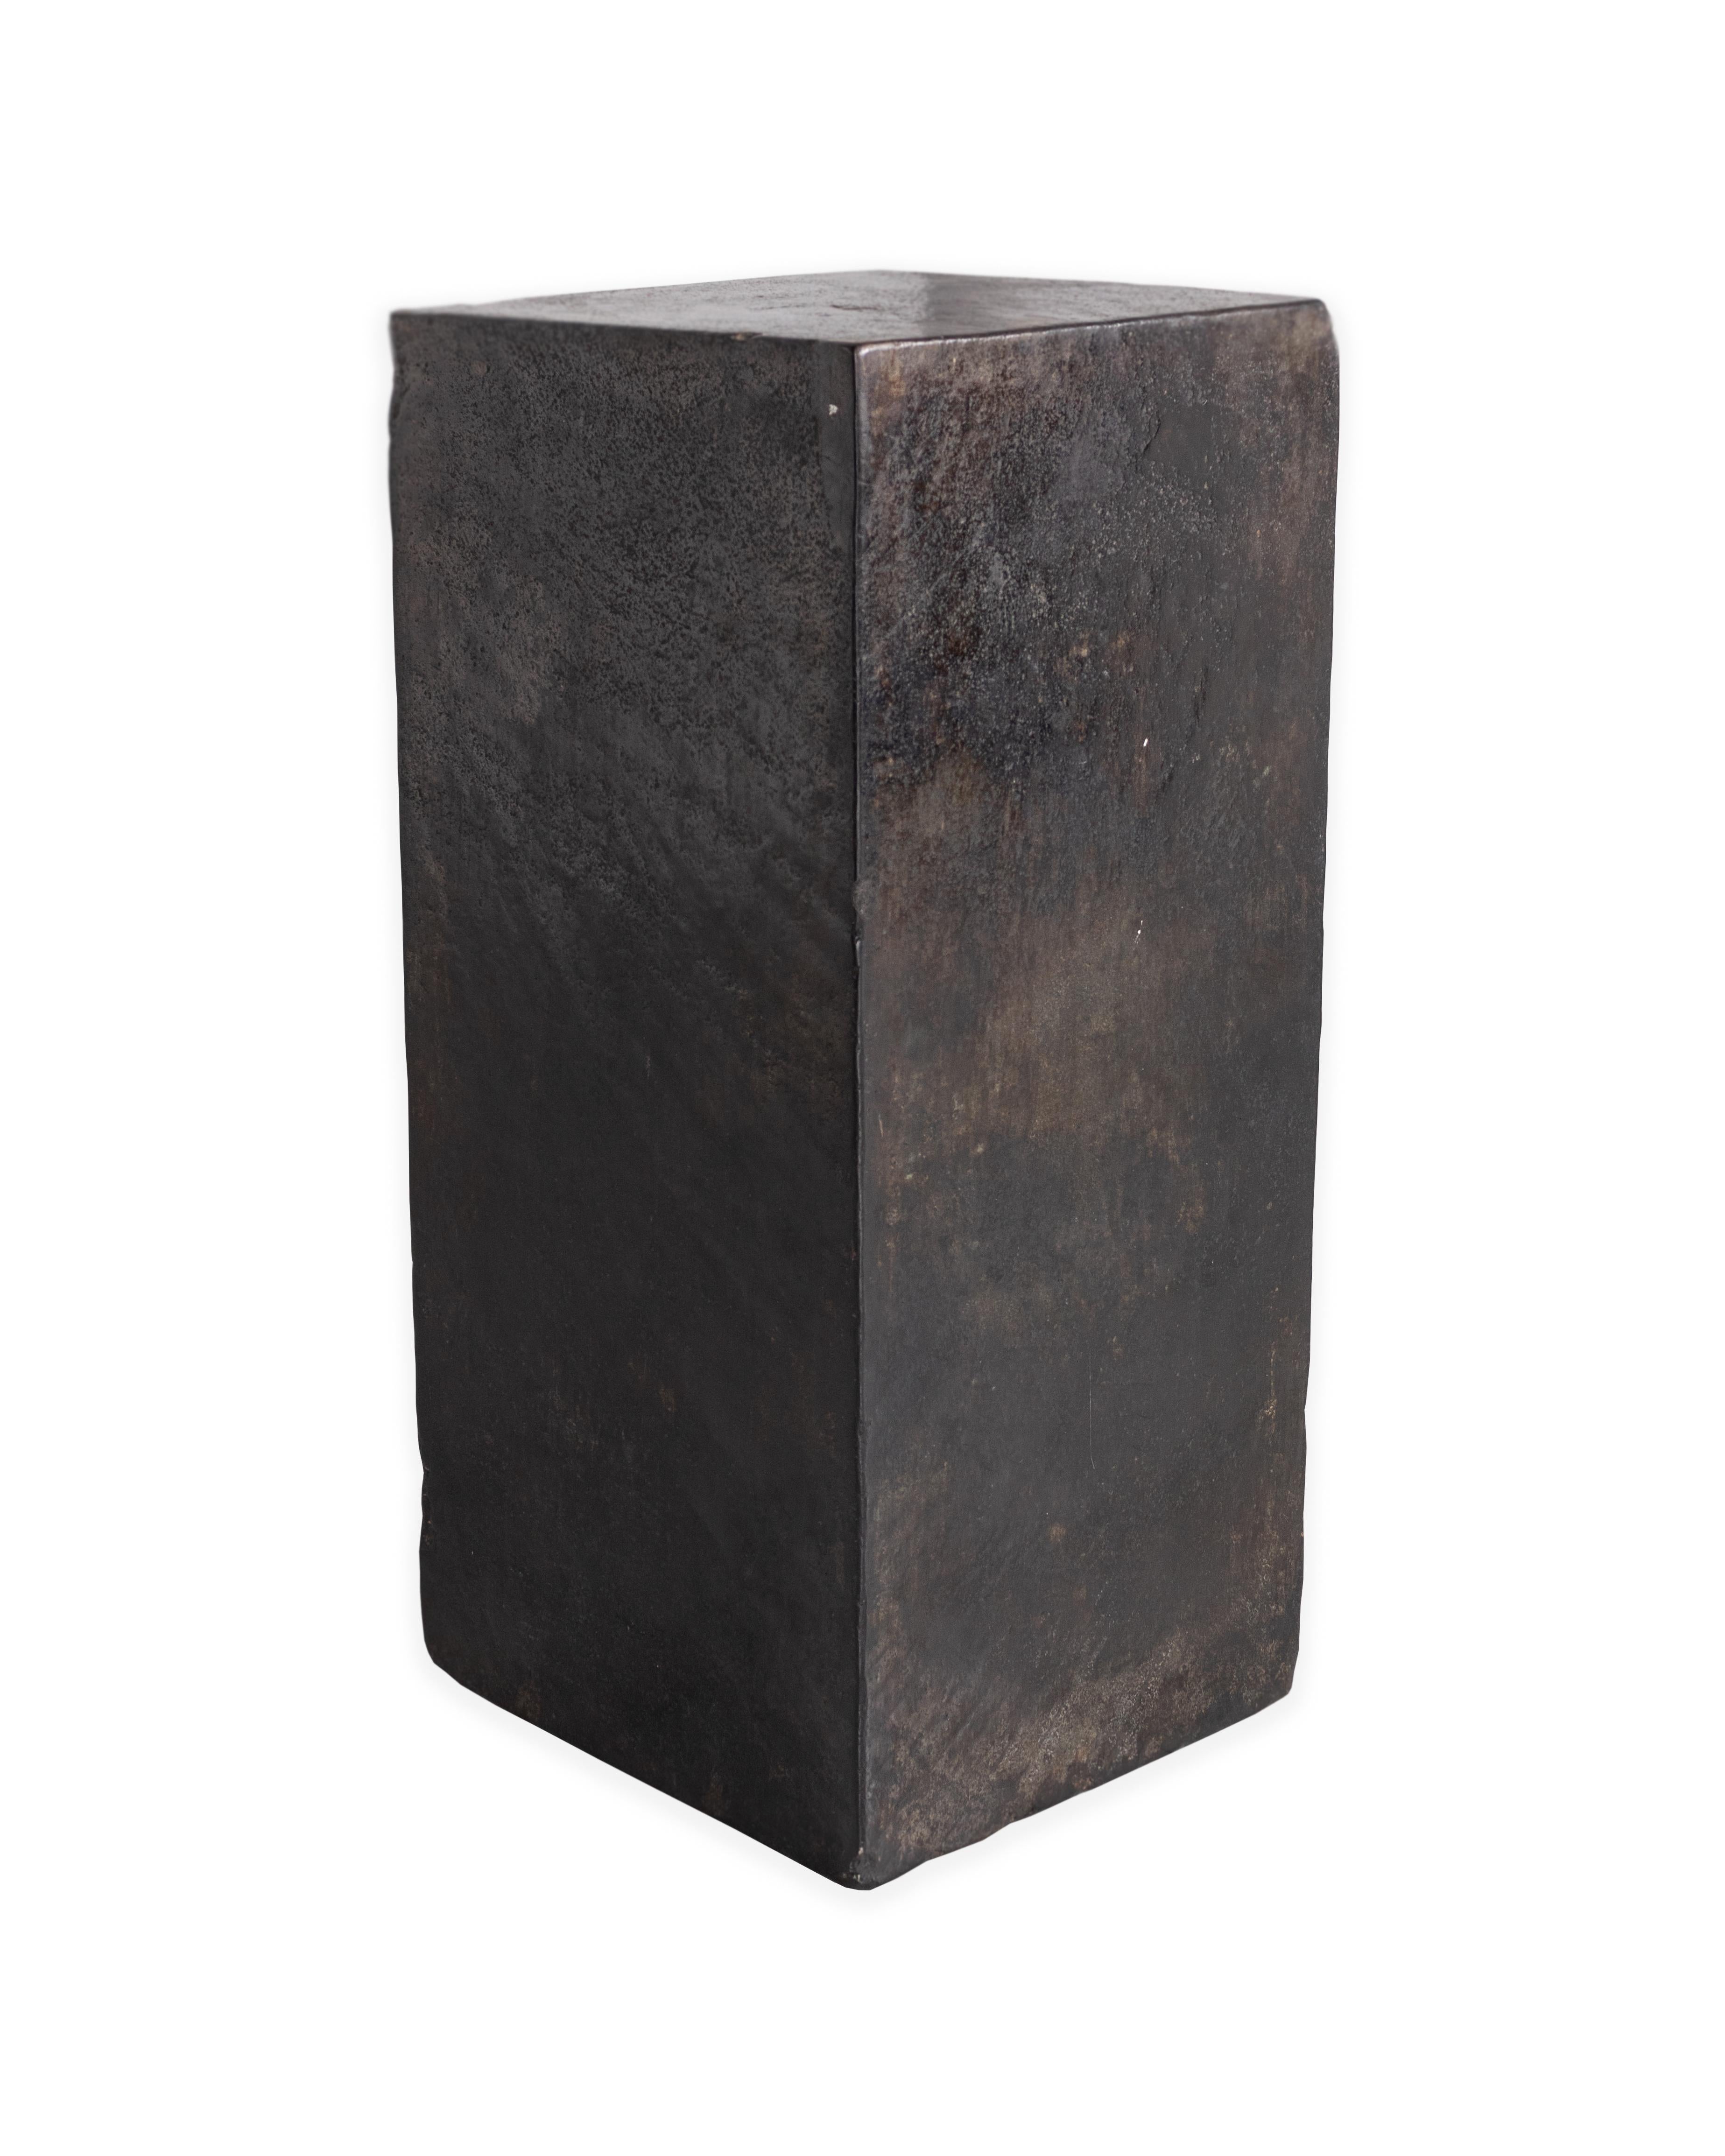 Distressed riverstone iron wood side table. 
In my organic, contemporary, vintage and mid-century modern aesthetic.

Piece from the Le Monde collection. Exclusive to Brendan Bass.
 